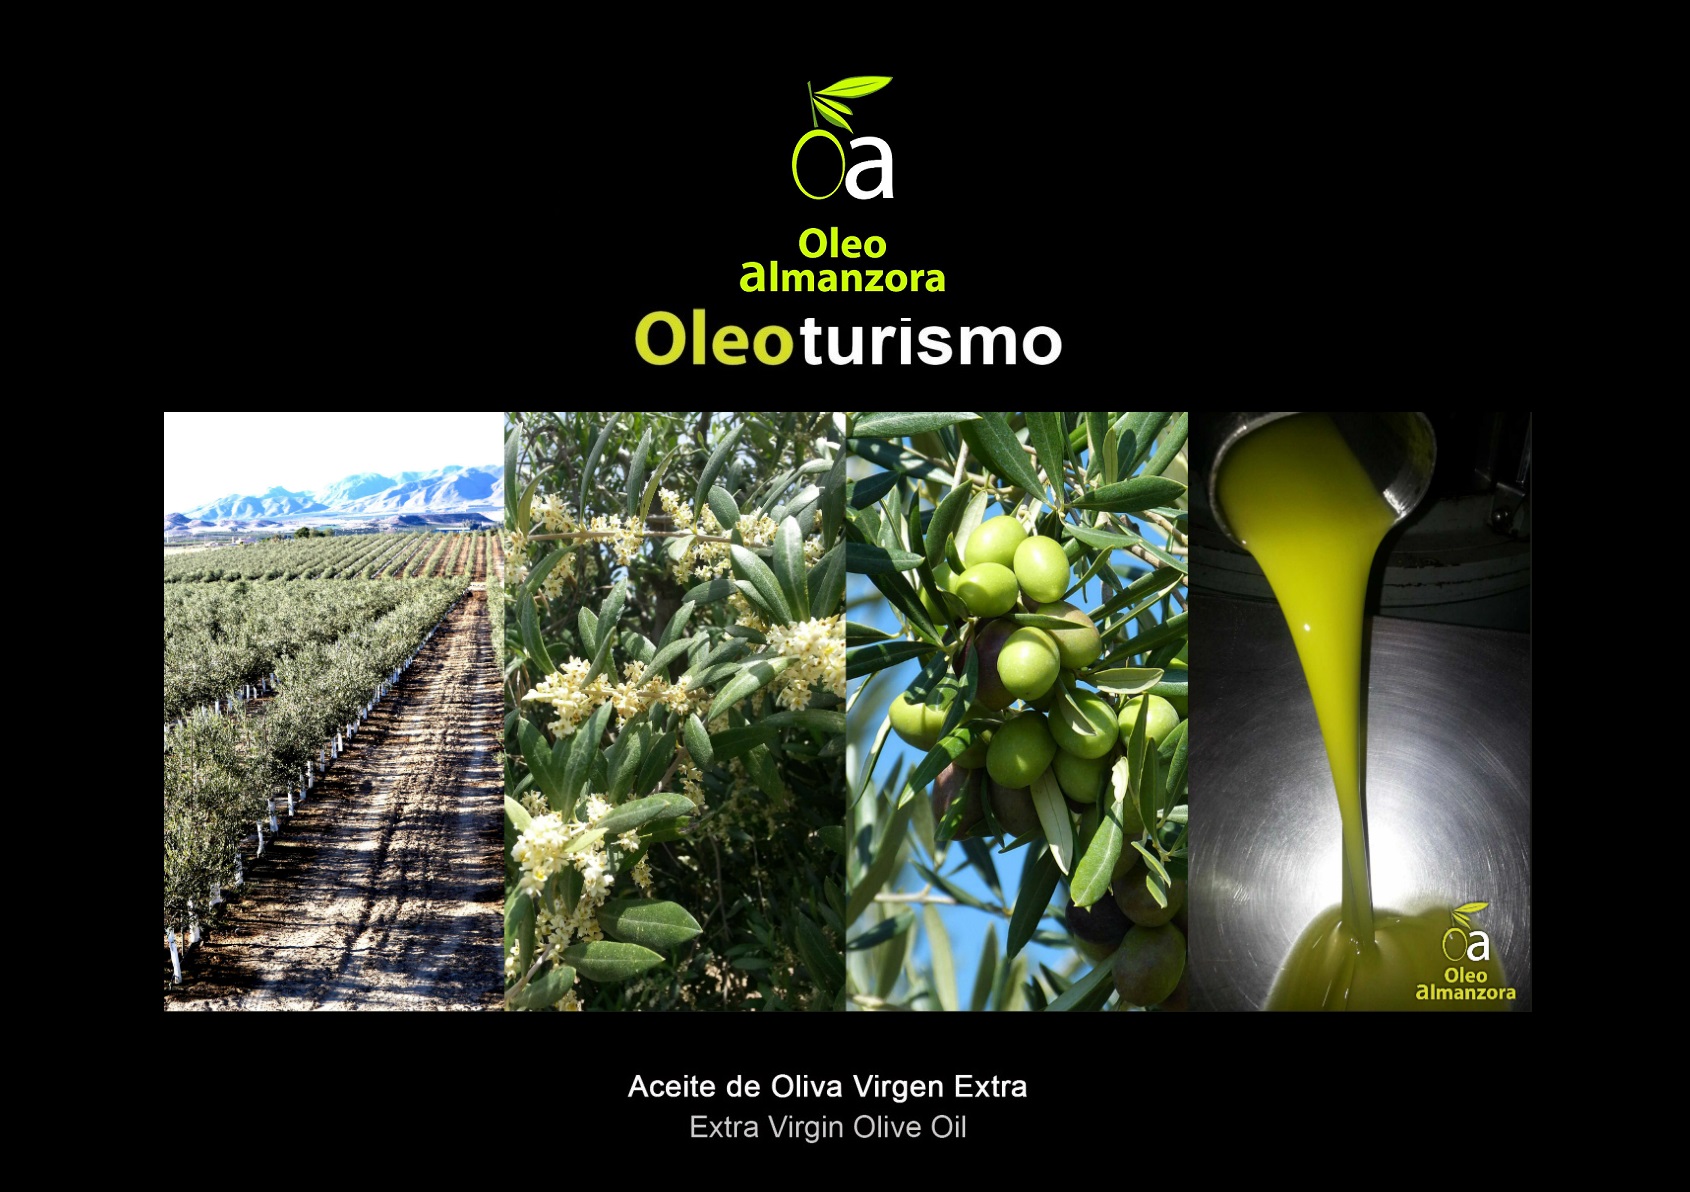 Tour with a healthy breakfast/afternoon snack and EVOO Sensory Tasting Masterclass